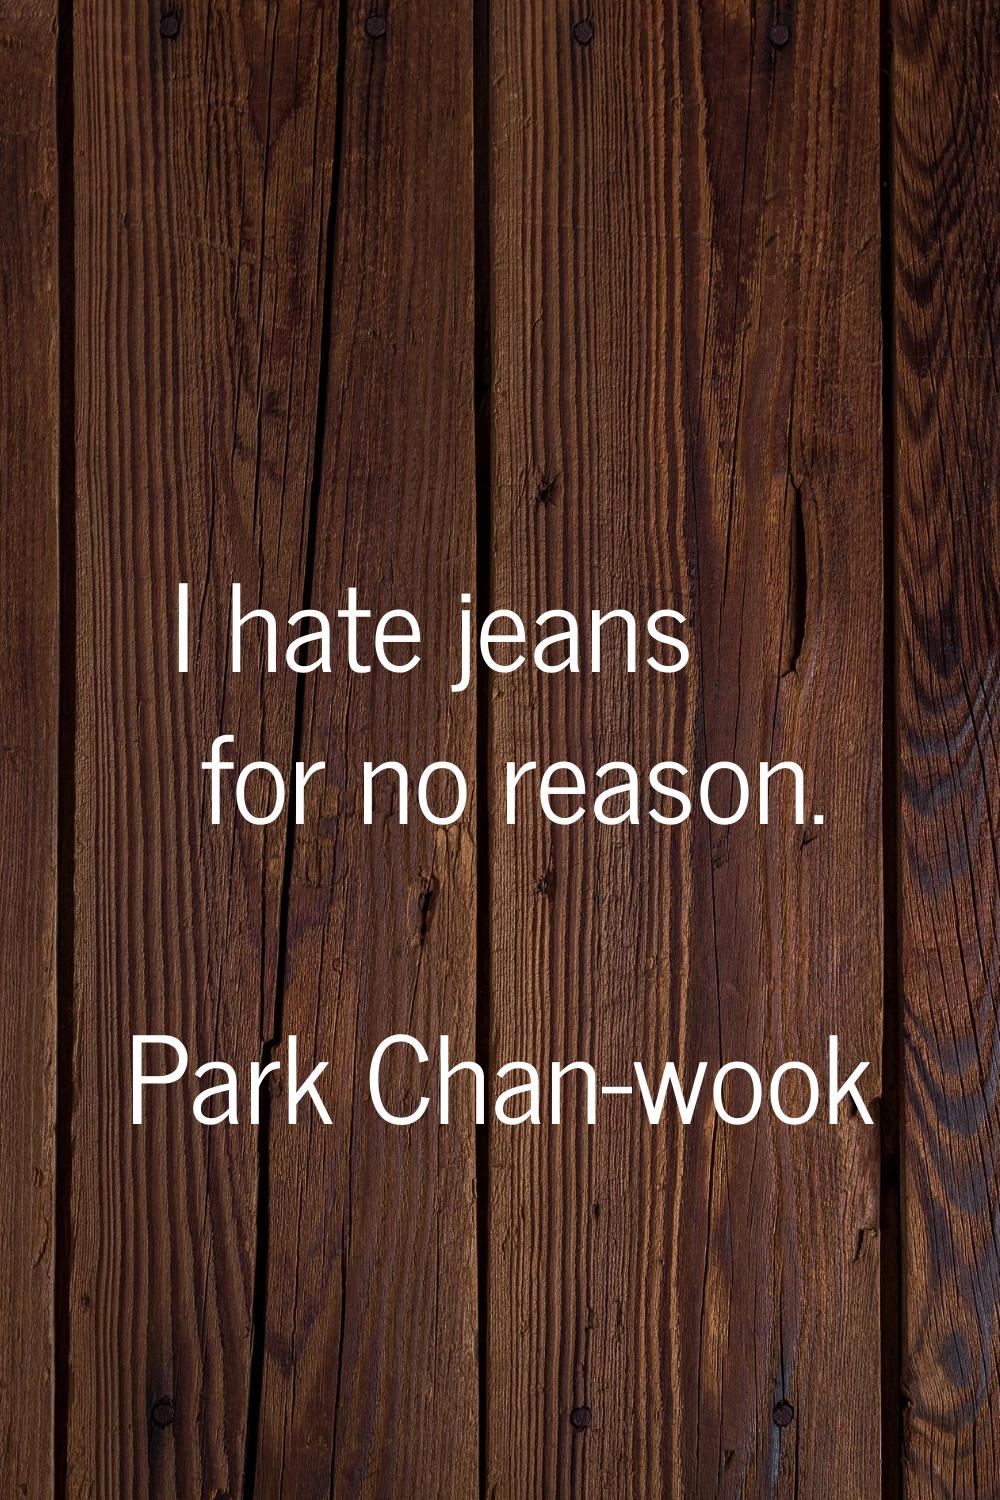 I hate jeans for no reason.